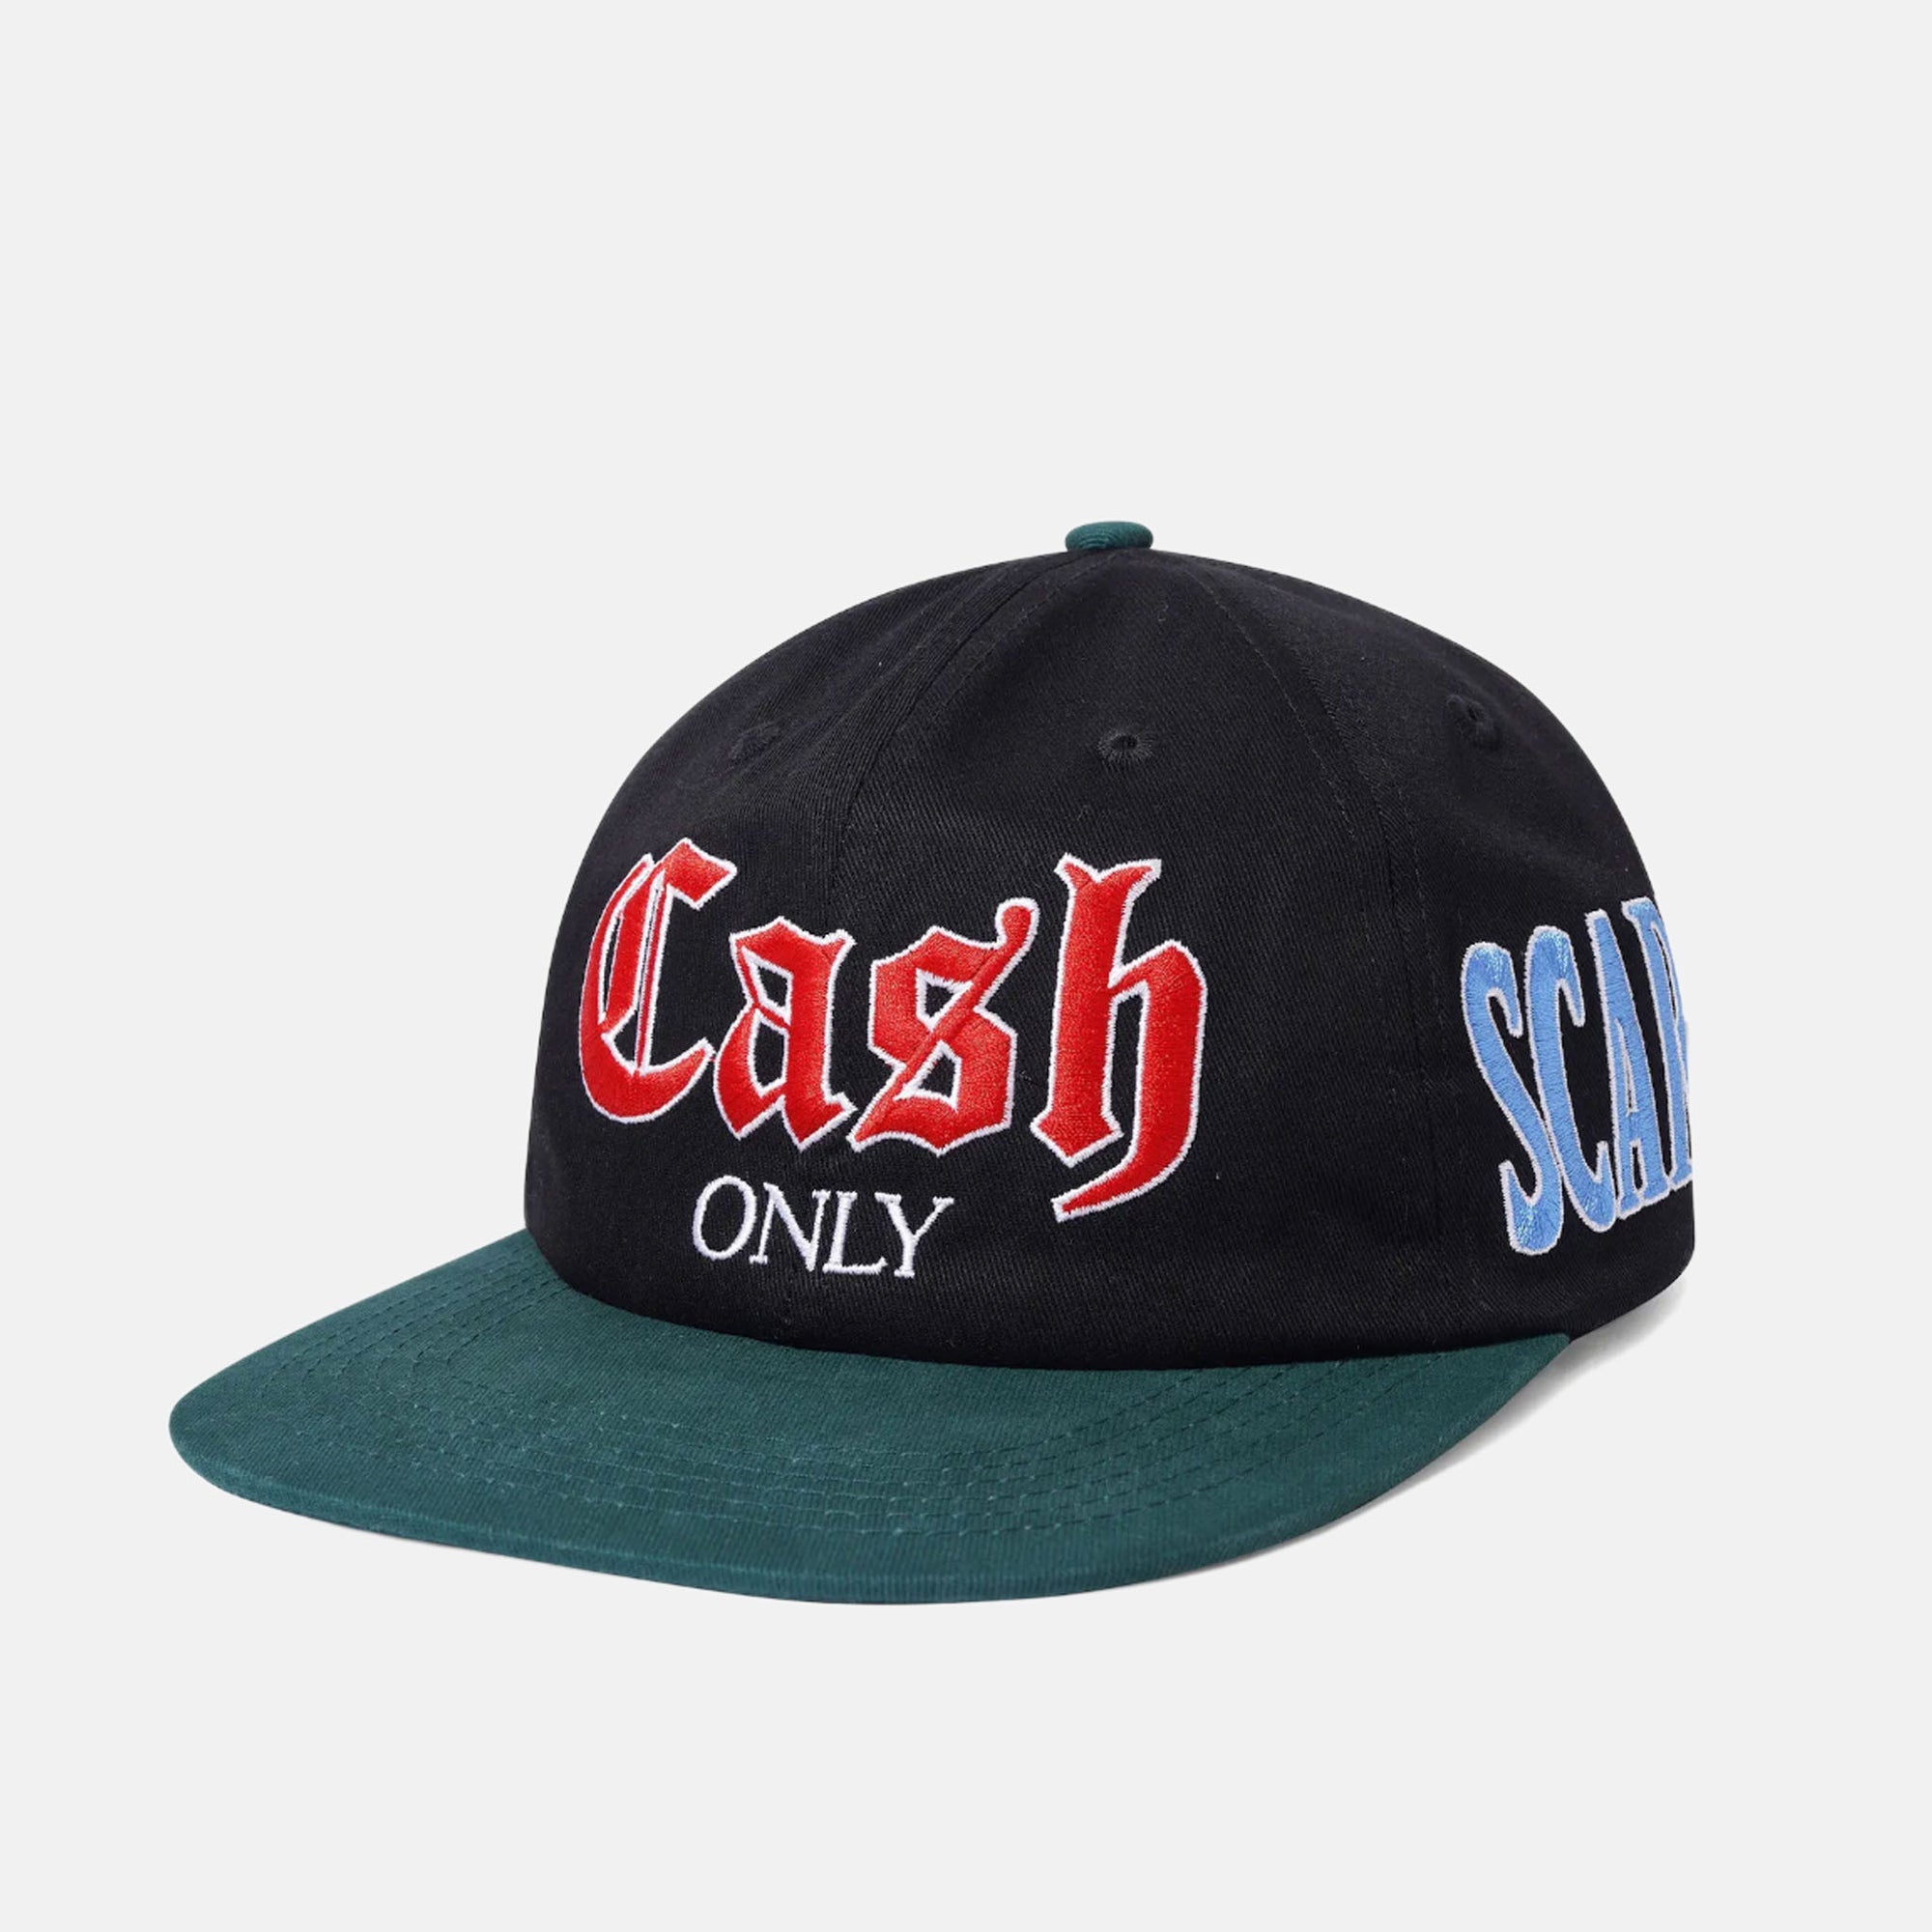 Cash Only - Training 6 Panel Cap - Black / Forest Green